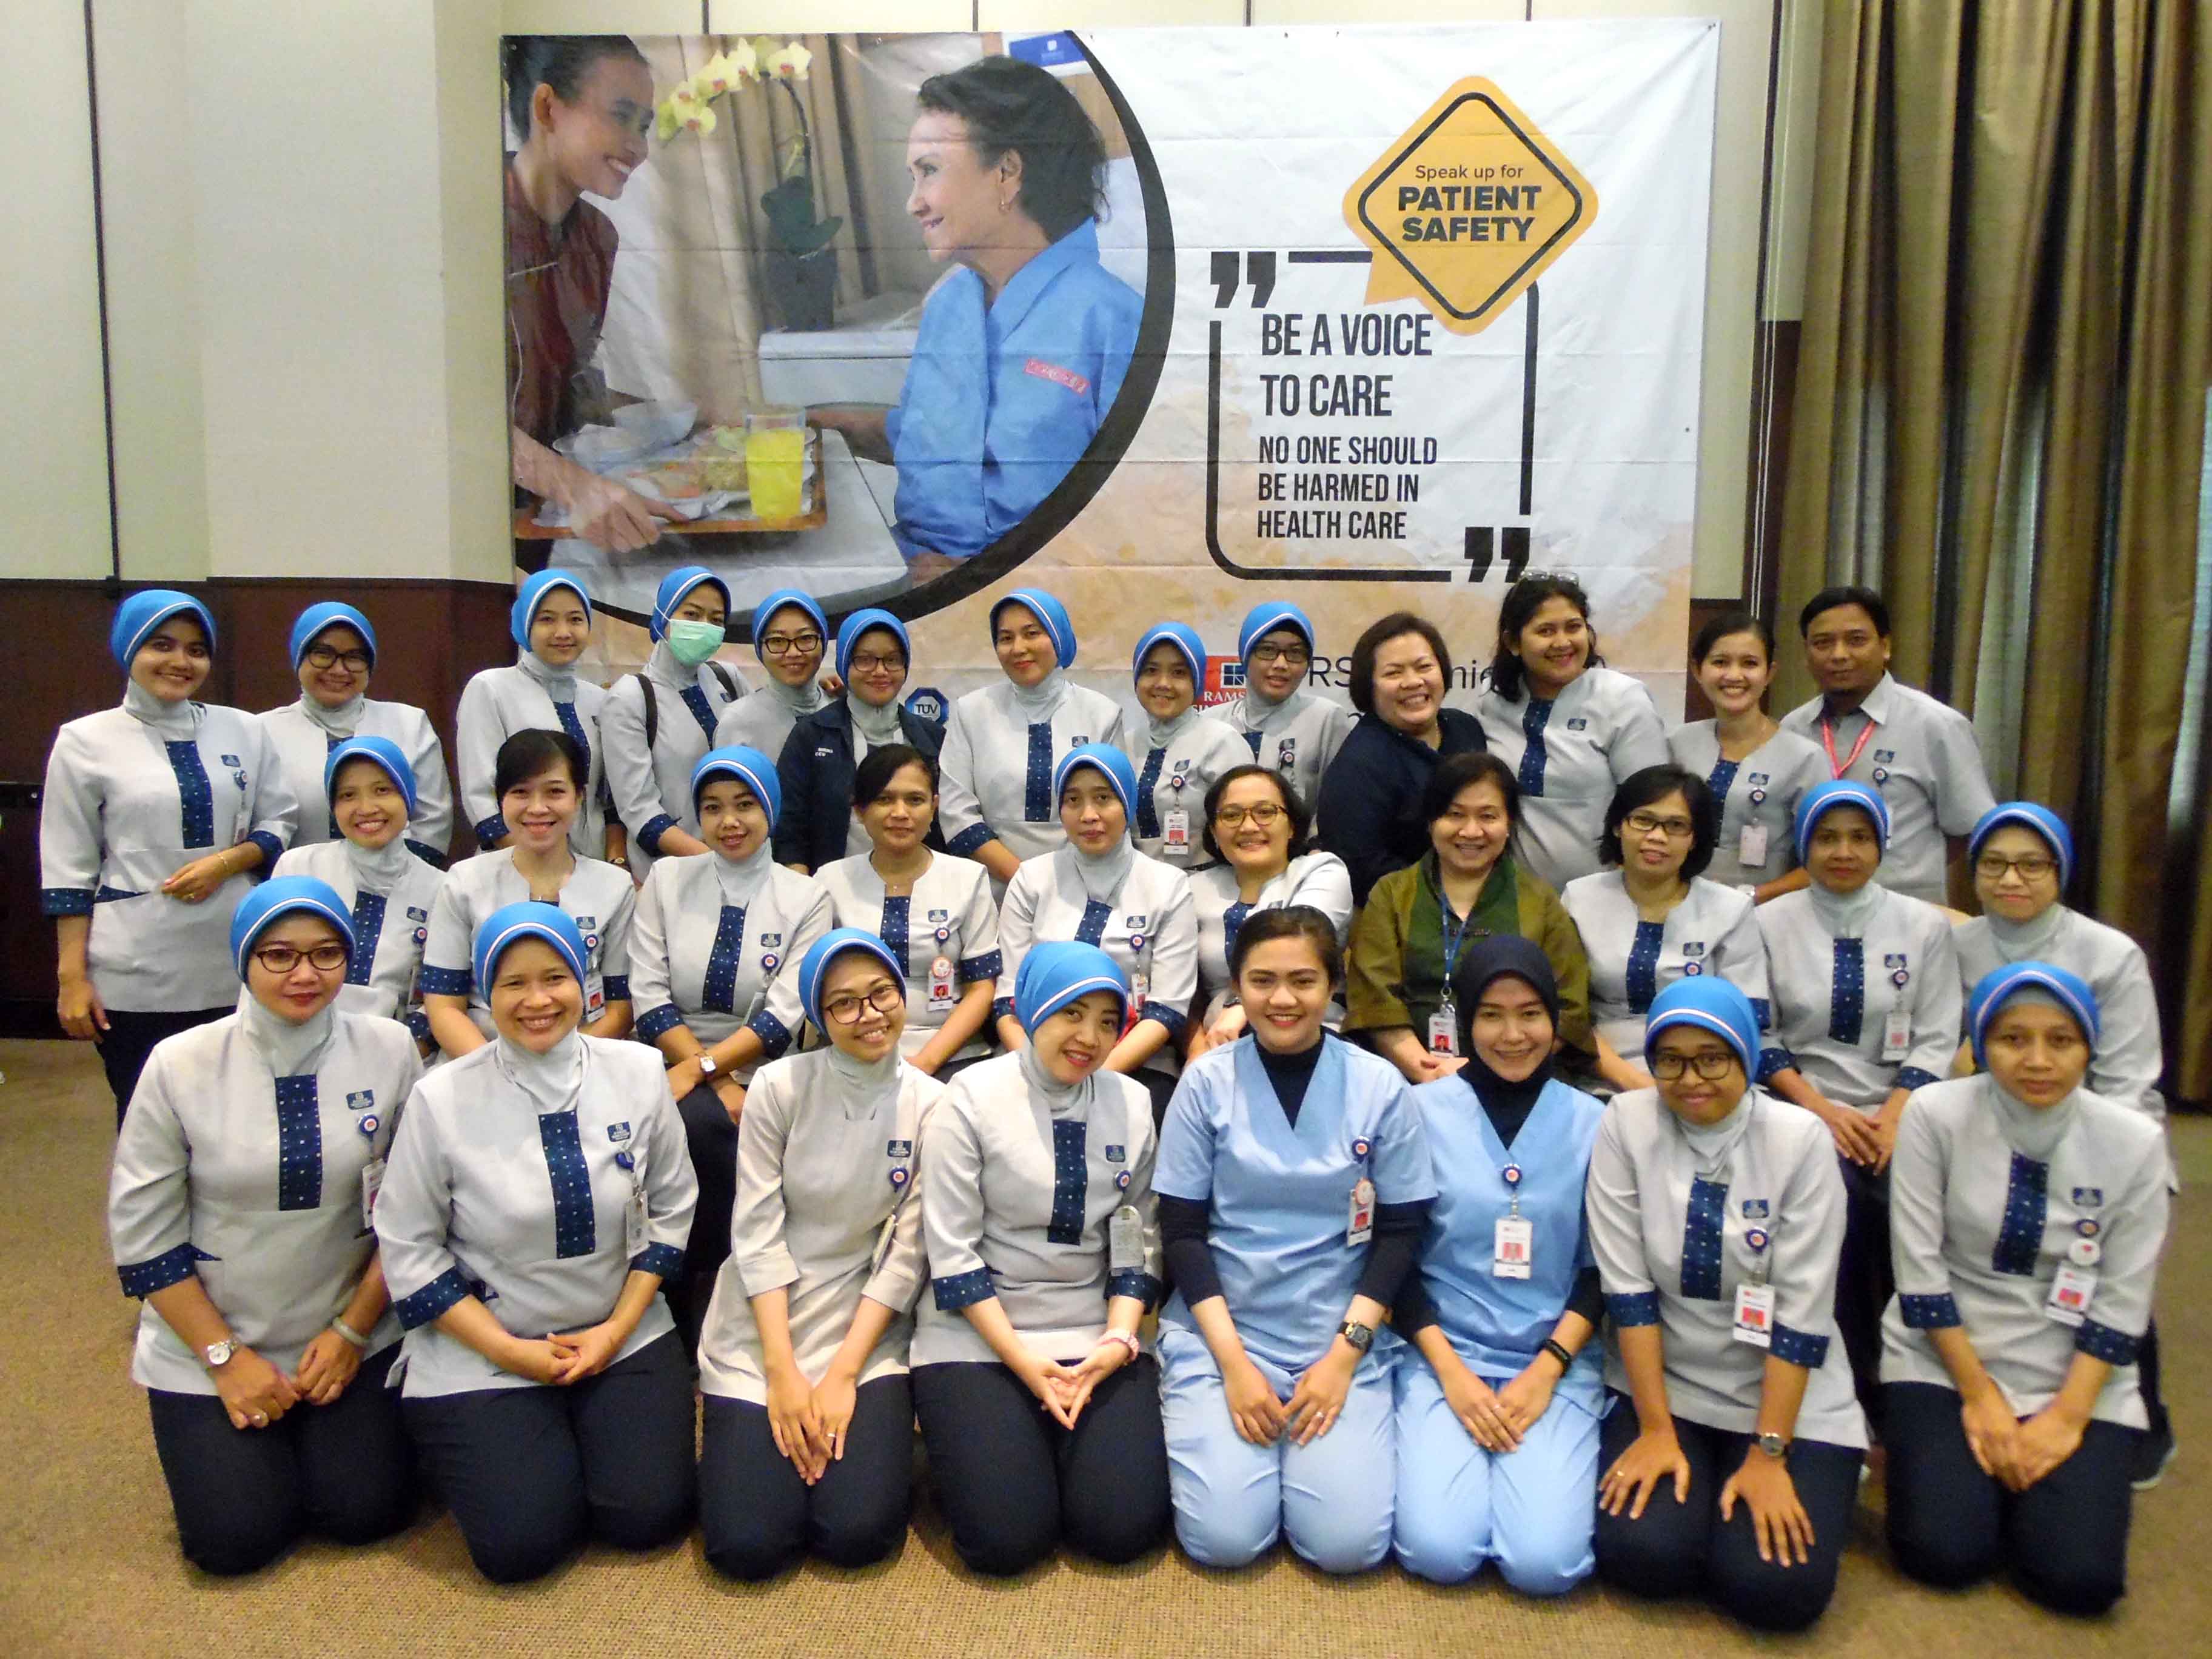 Speak Up For Patient Safety Sesi Perawat di RSPB